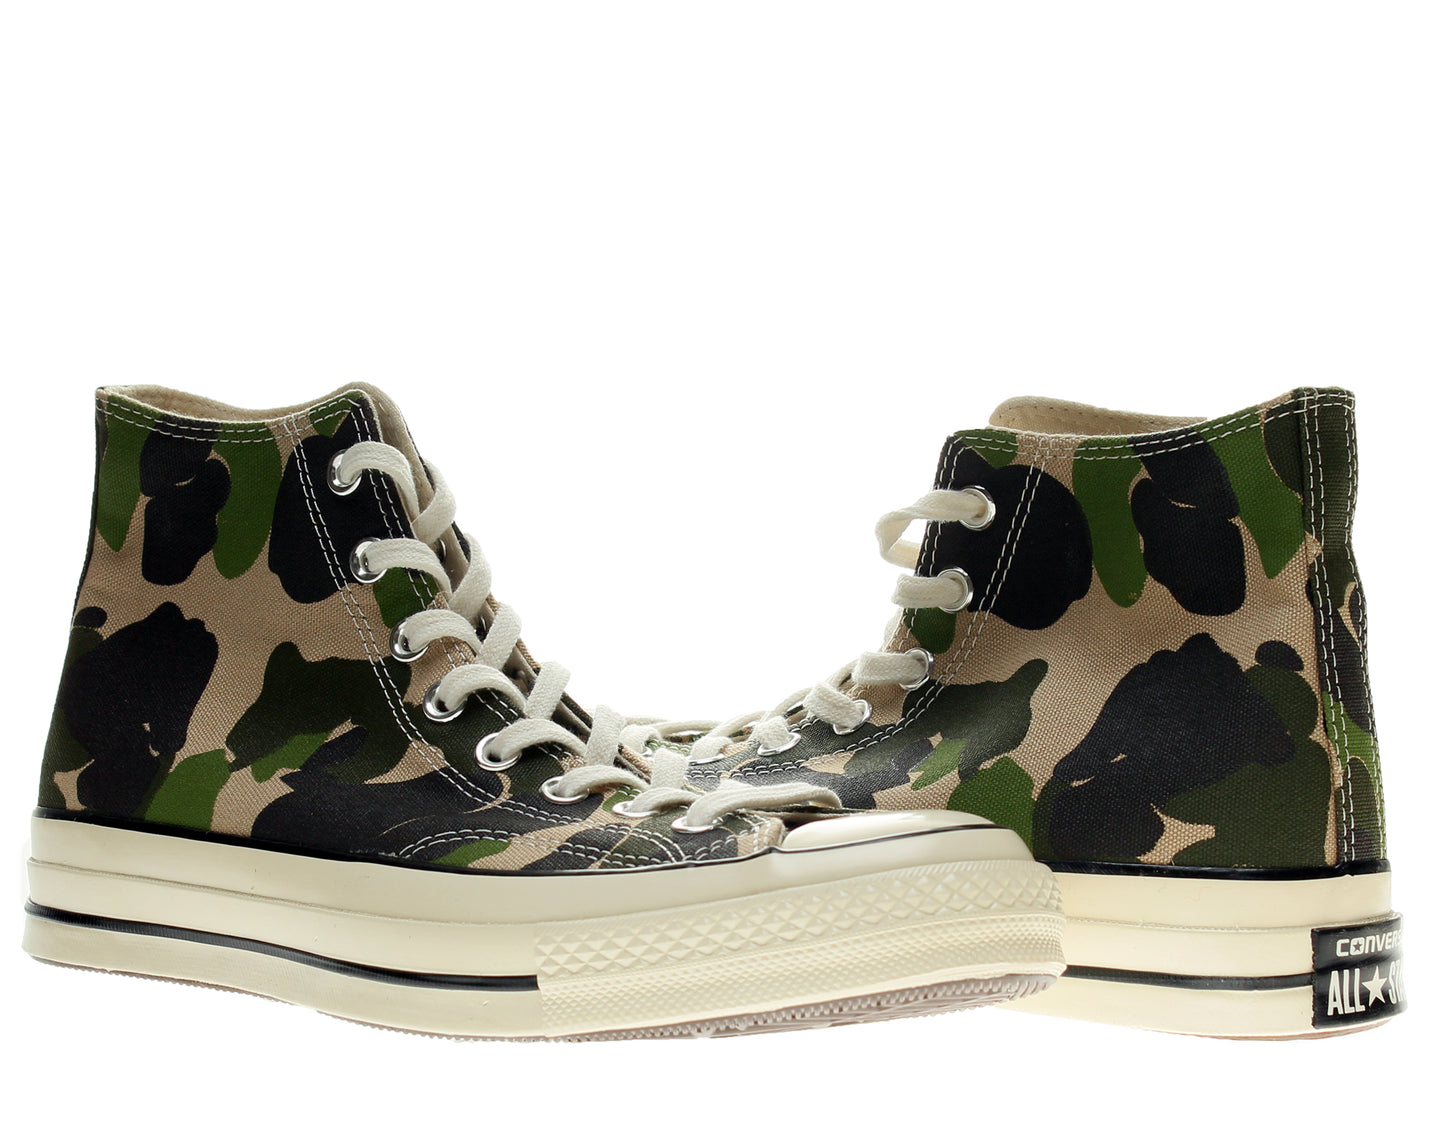 Converse Chuck Taylor All Star 70' Camoflage High top Sneakers